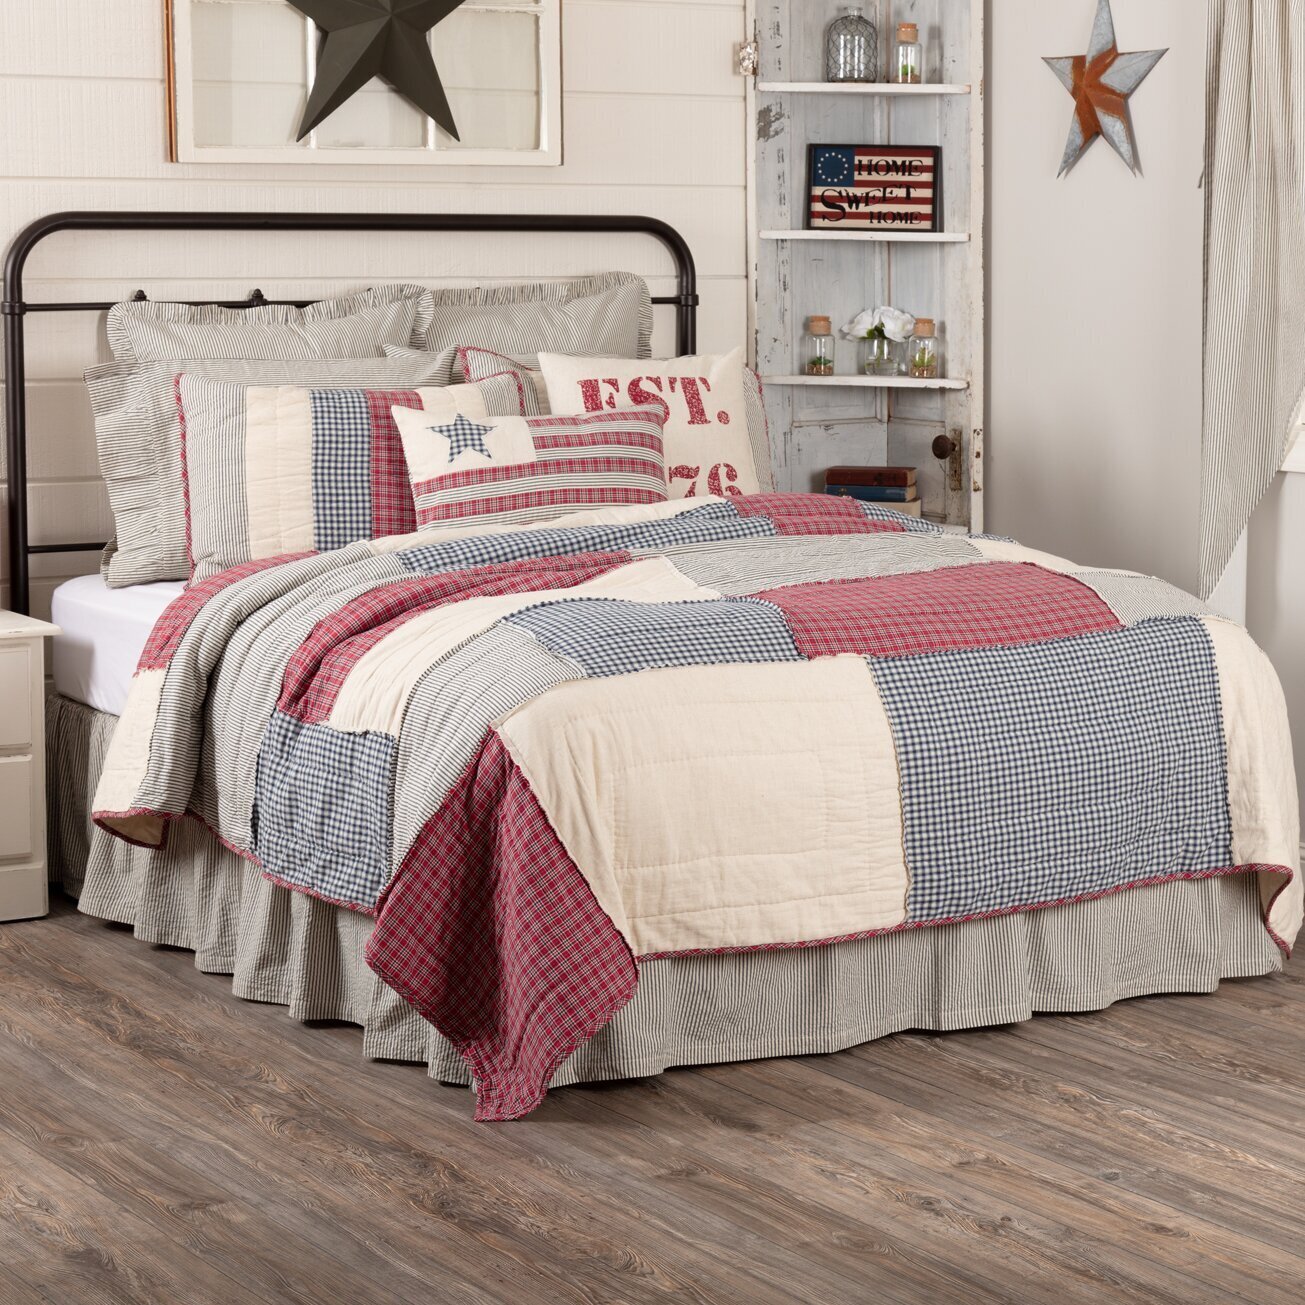 Patchwork quilt in American flag colors